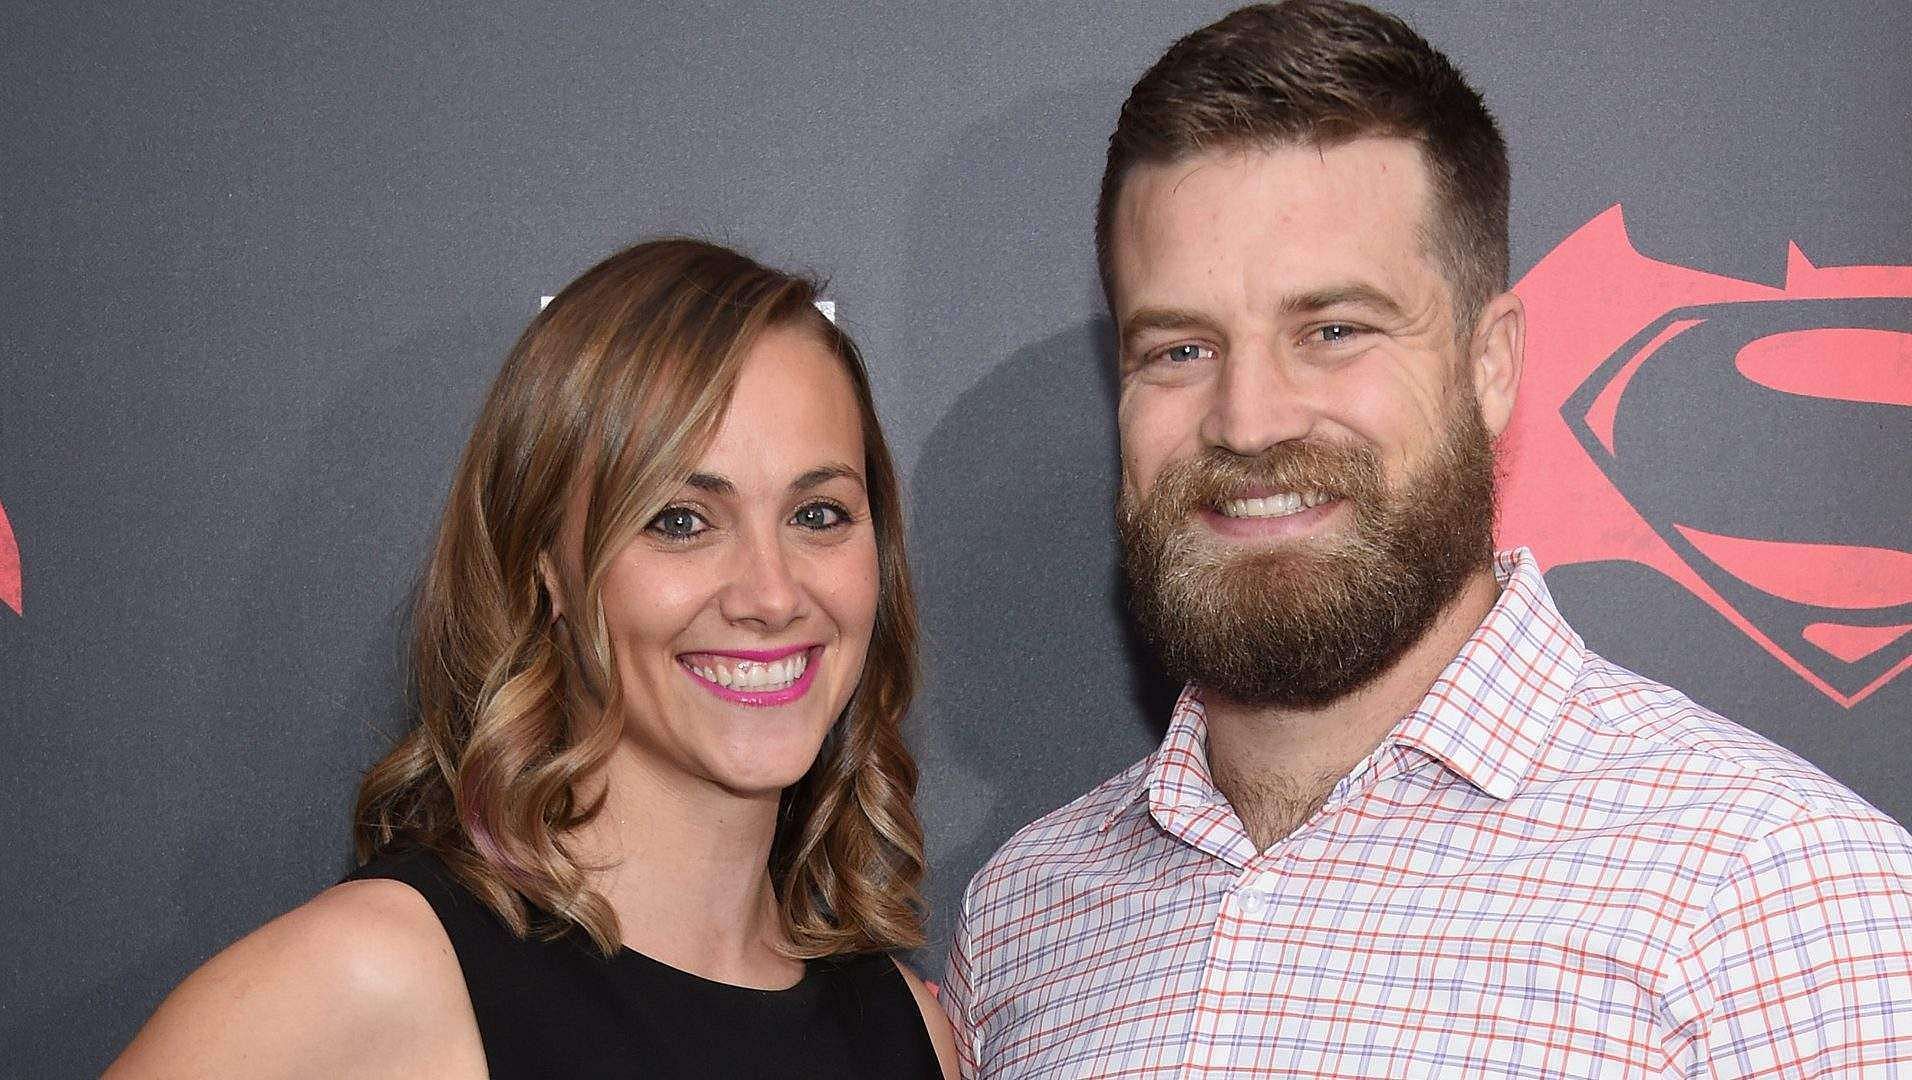 Ryan Fitzpatrick with his wife Liza Barber